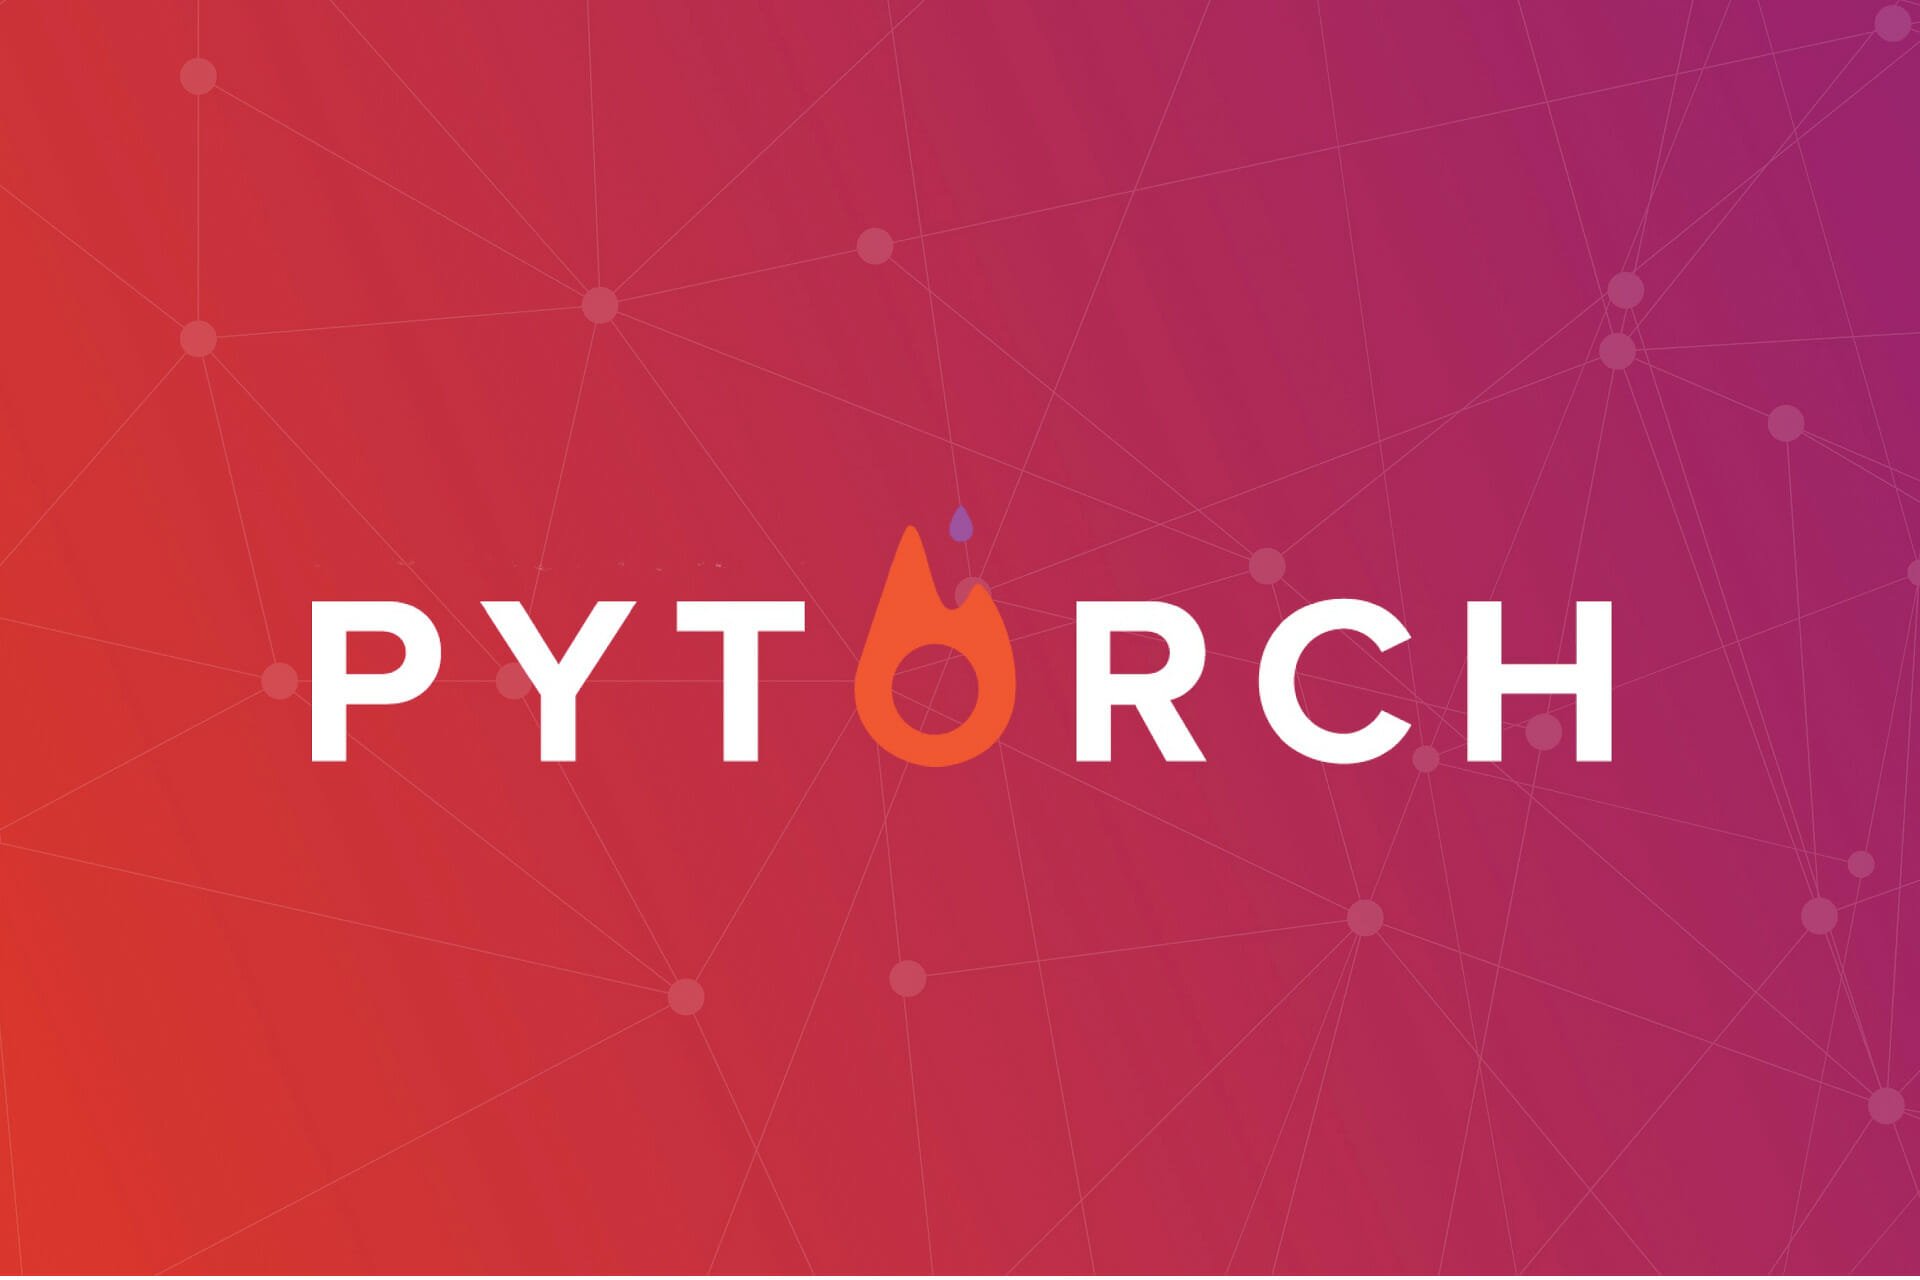 Microsoft is taking over PyTorch for Windows from Facebook